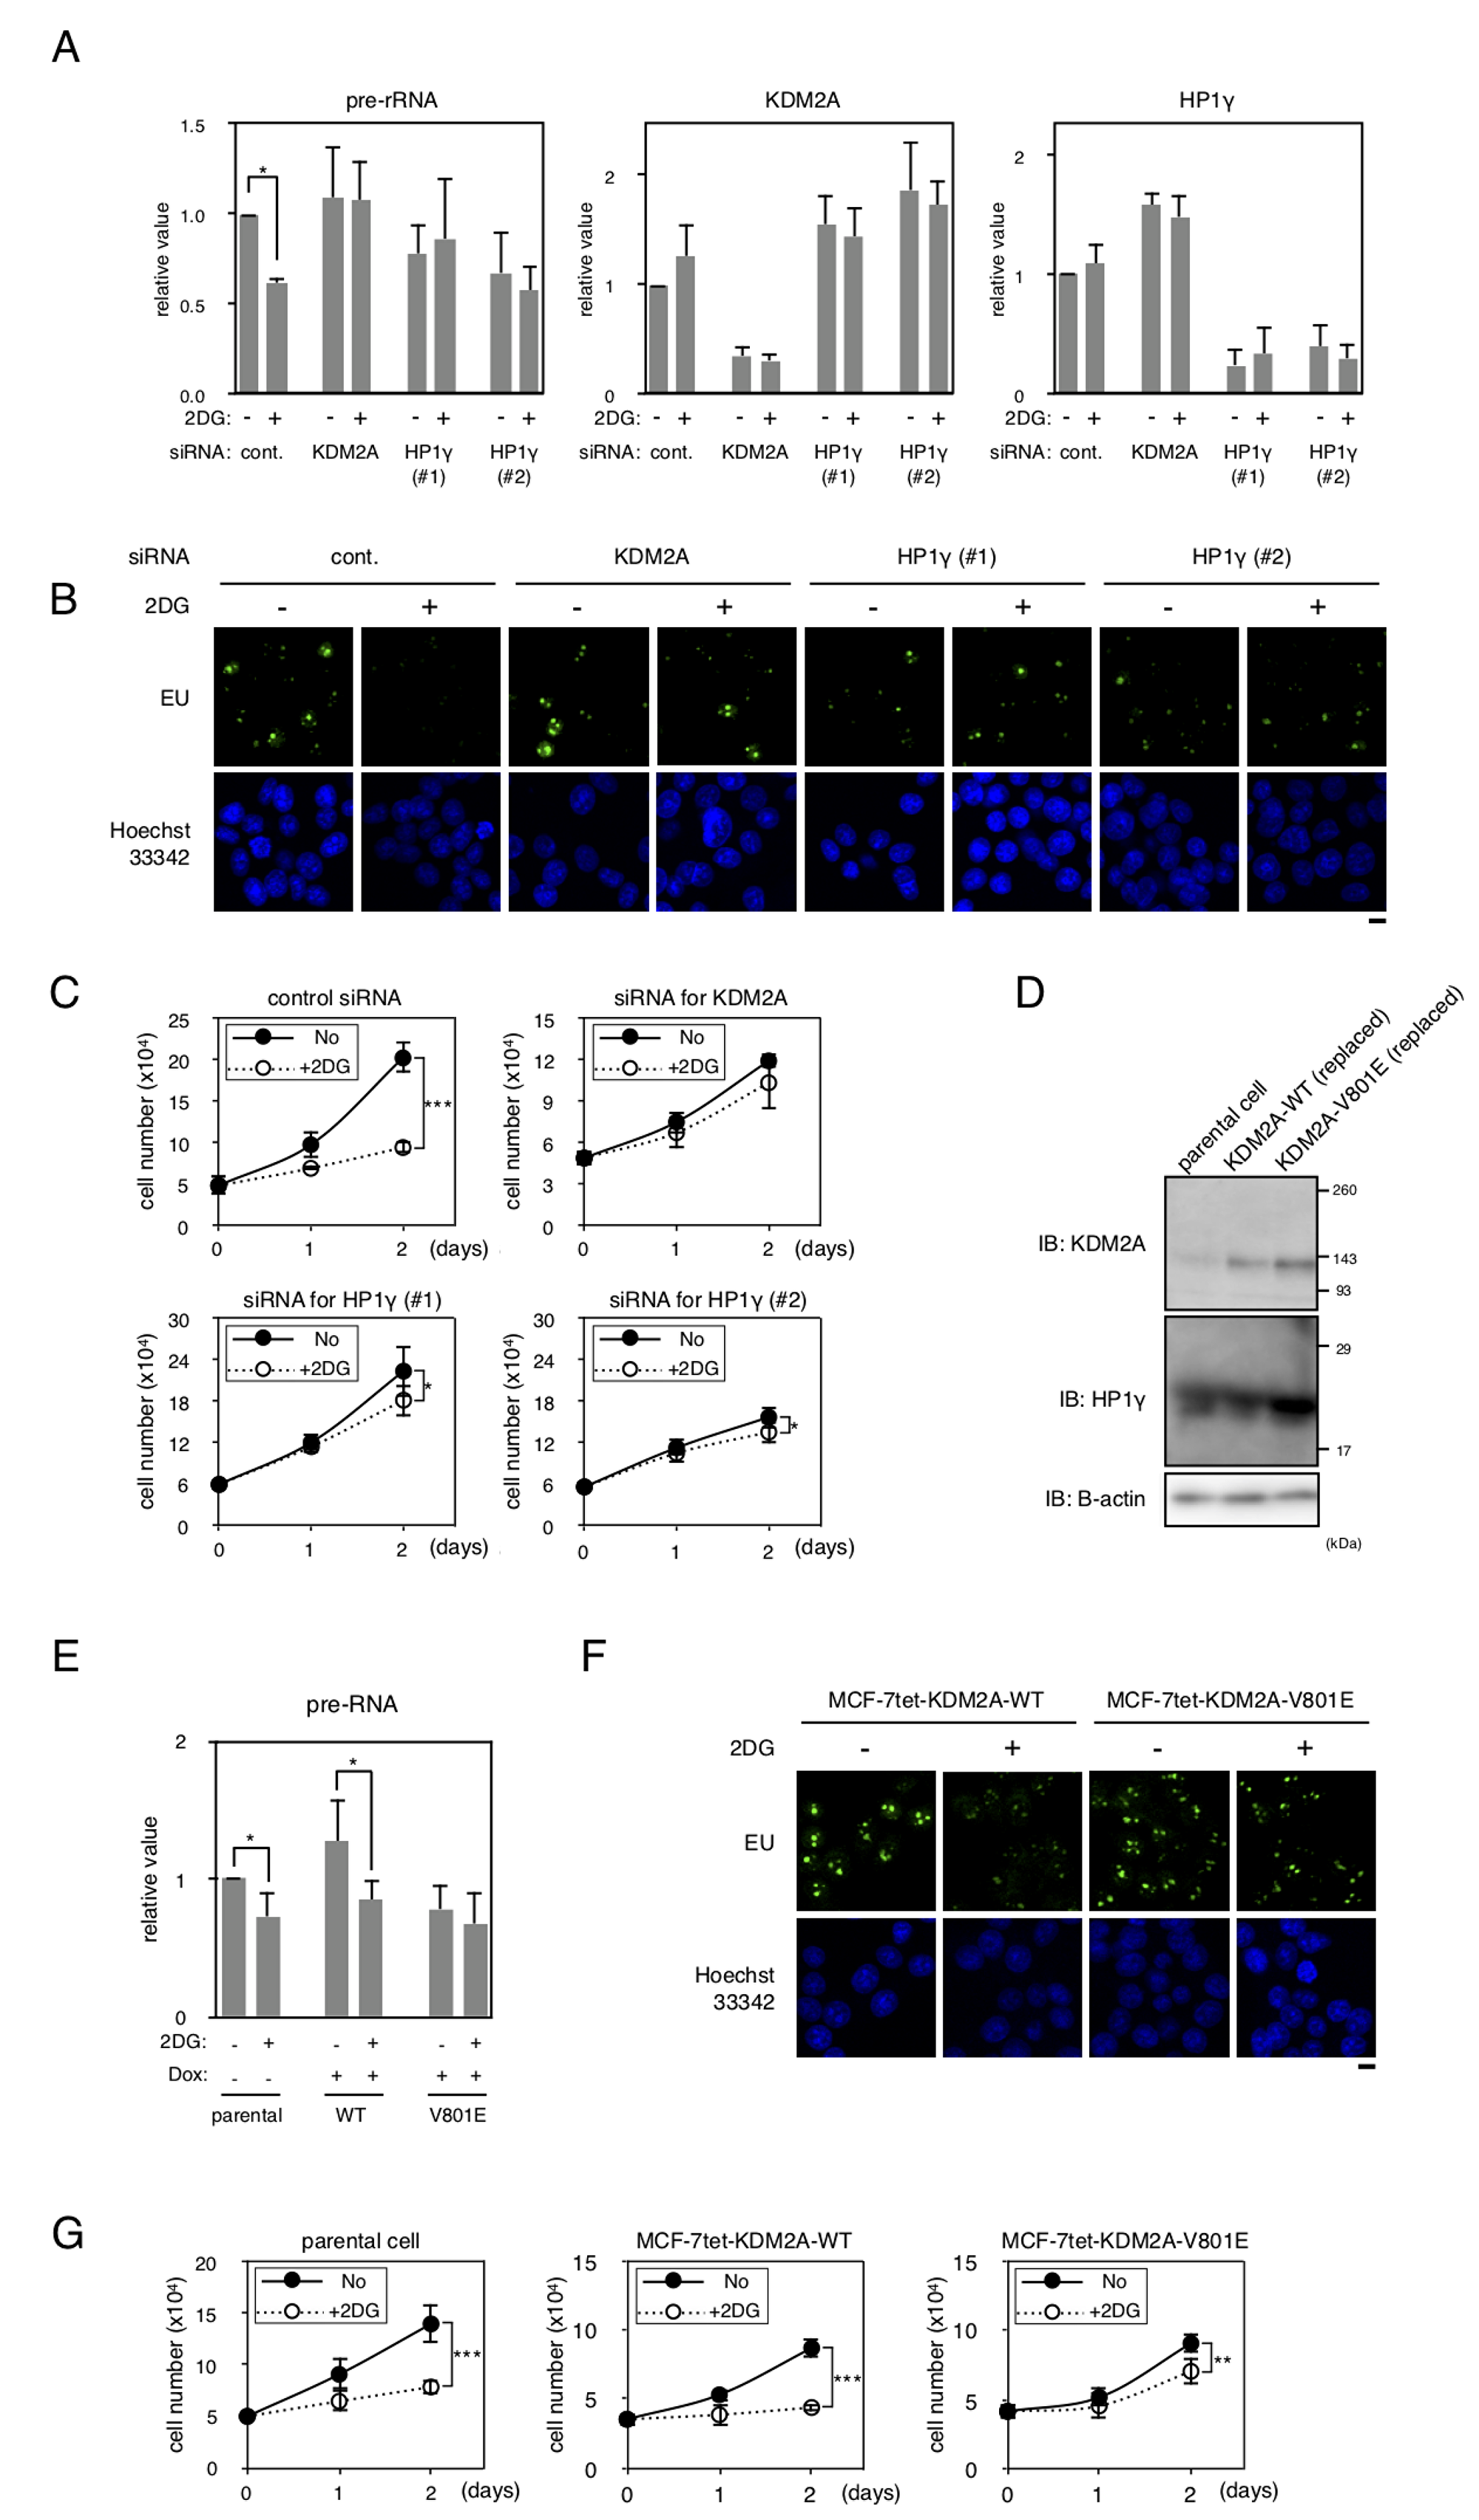 HP1γ is involved in KDM2A-dependent reductions of rRNA transcription and cell proliferation on glucose starvation.